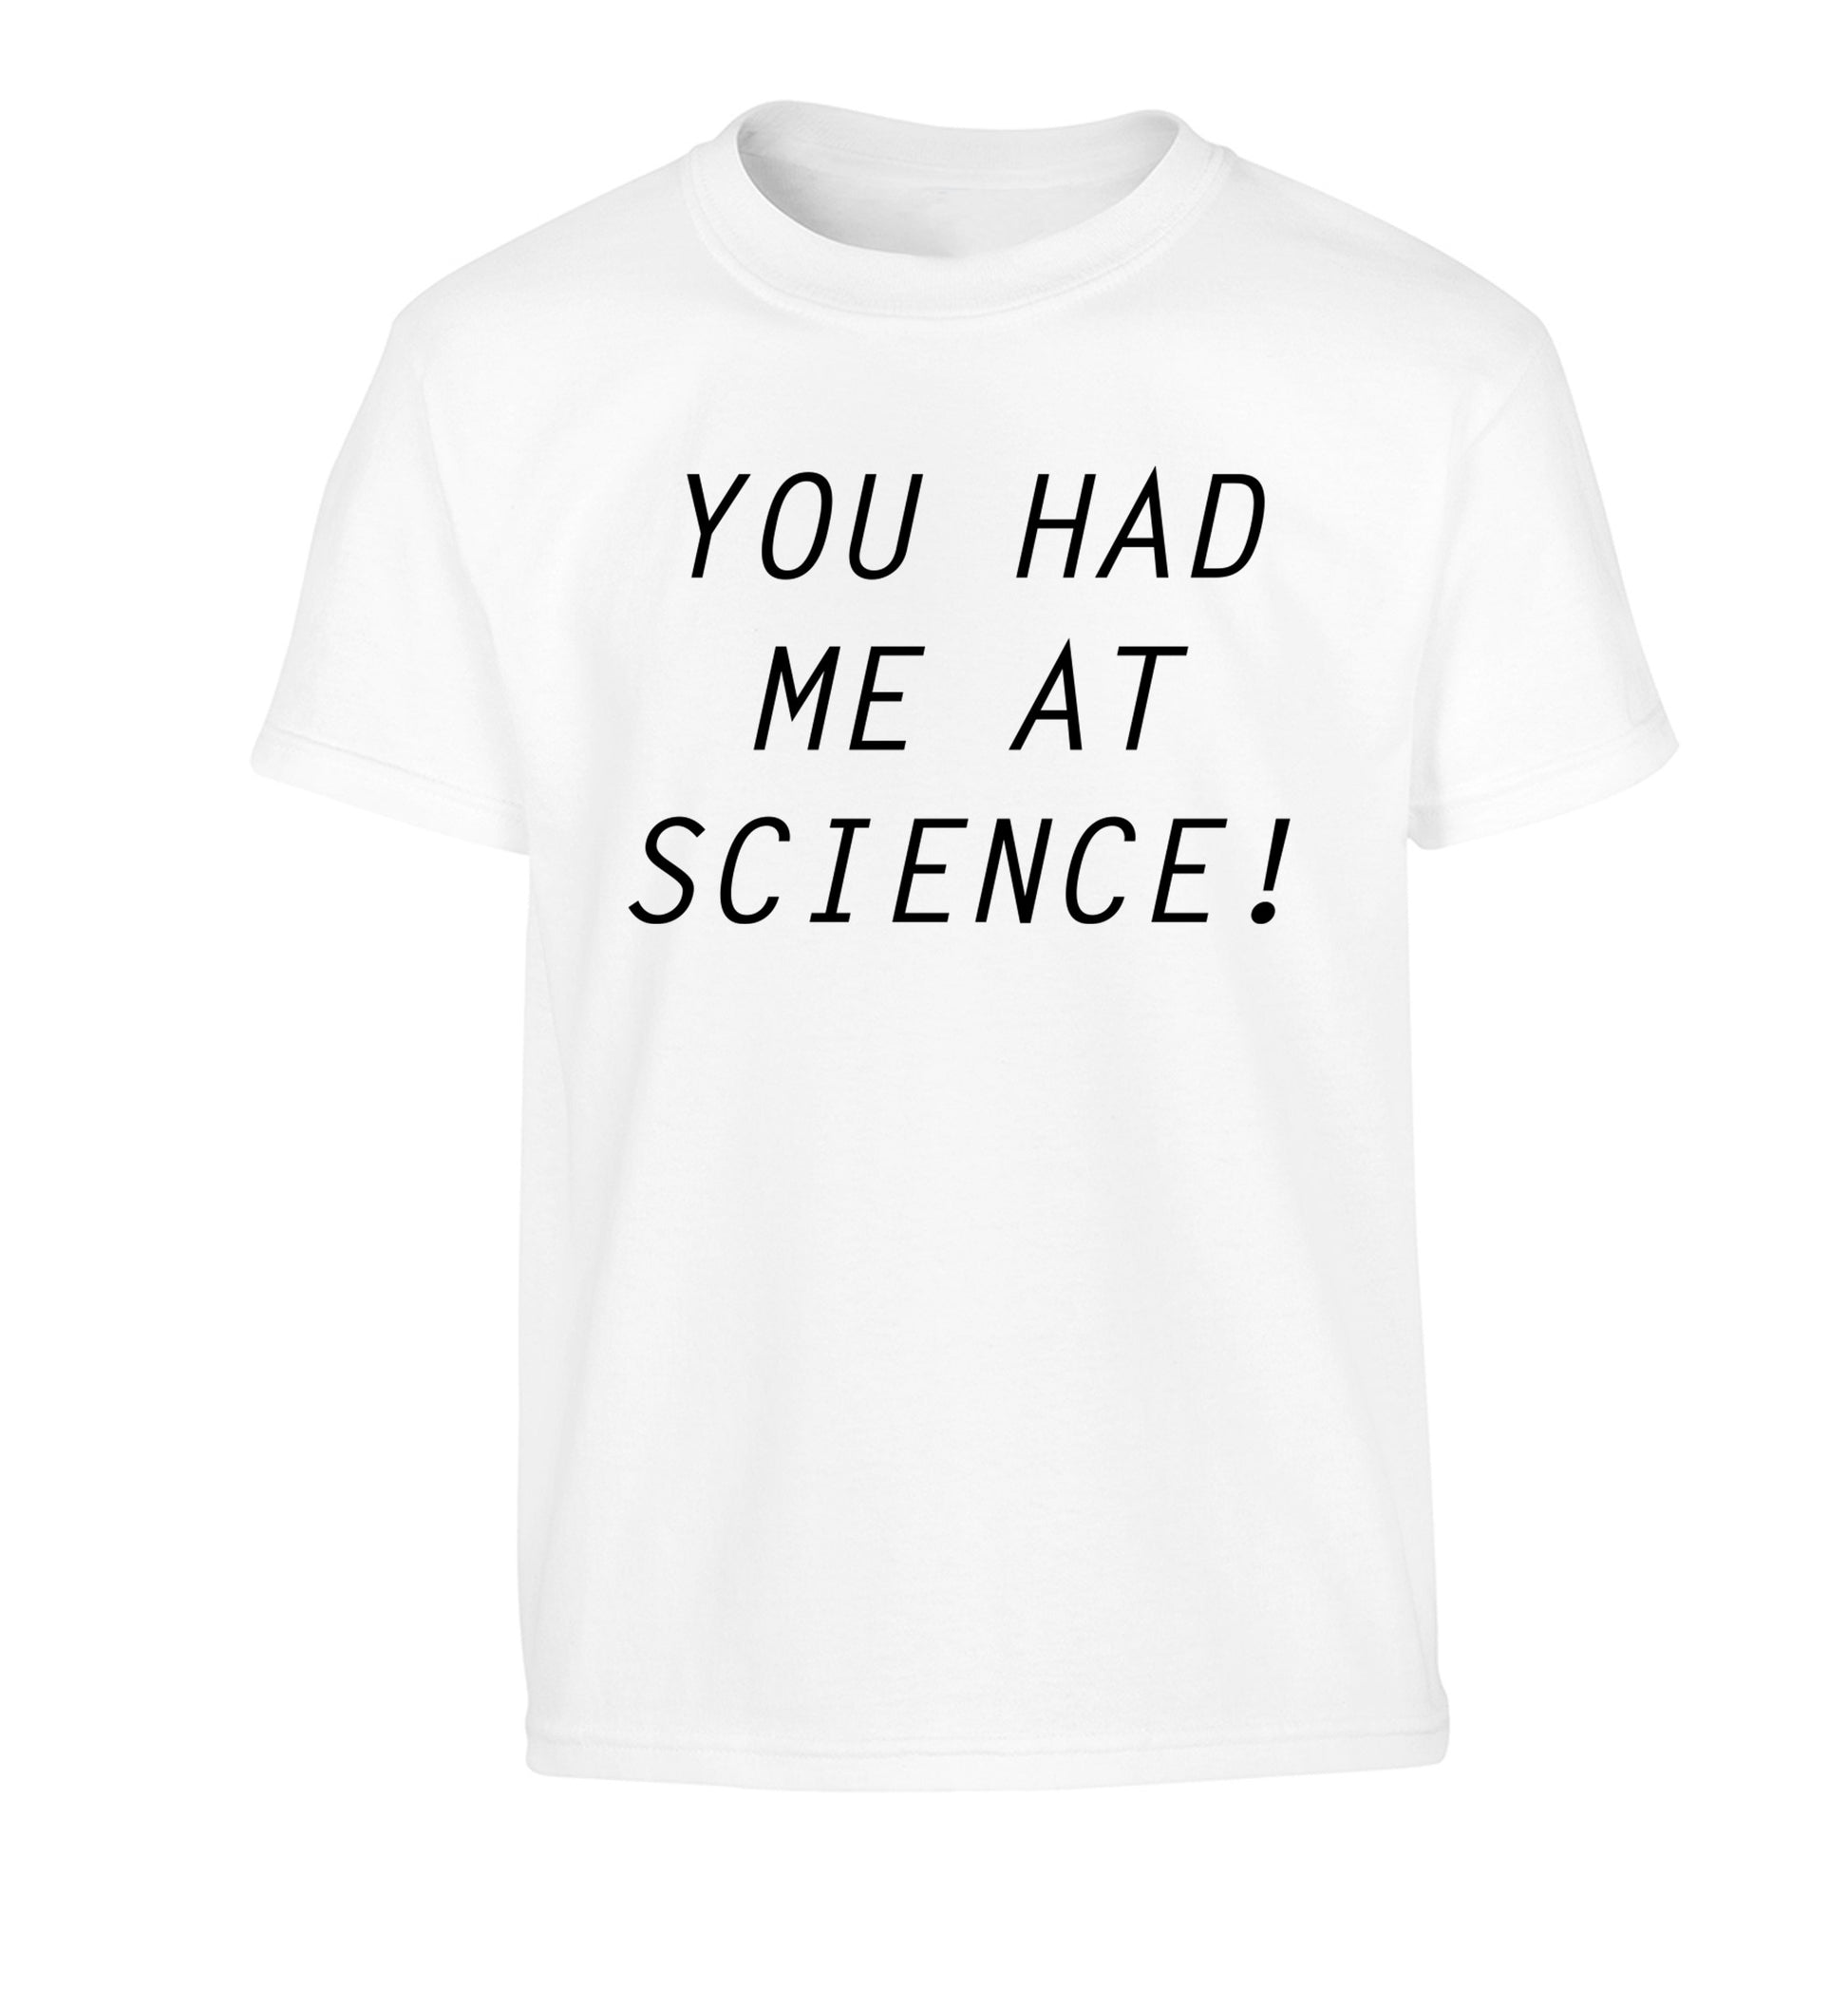 You had me at science Children's white Tshirt 12-14 Years